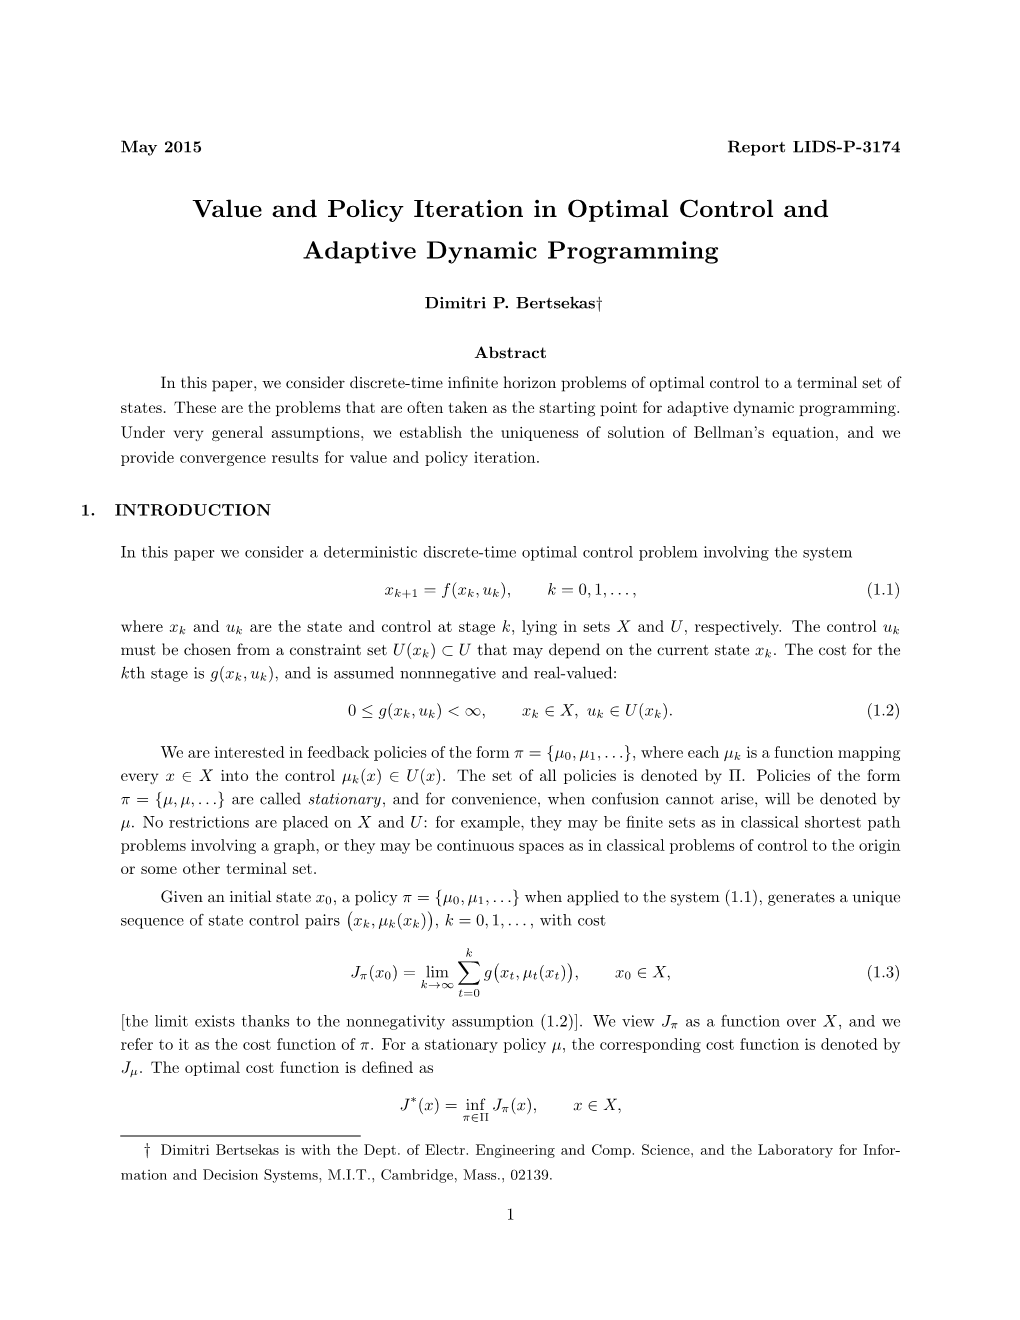 Value and Policy Iteration in Optimal Control and Adaptive Dynamic Programming